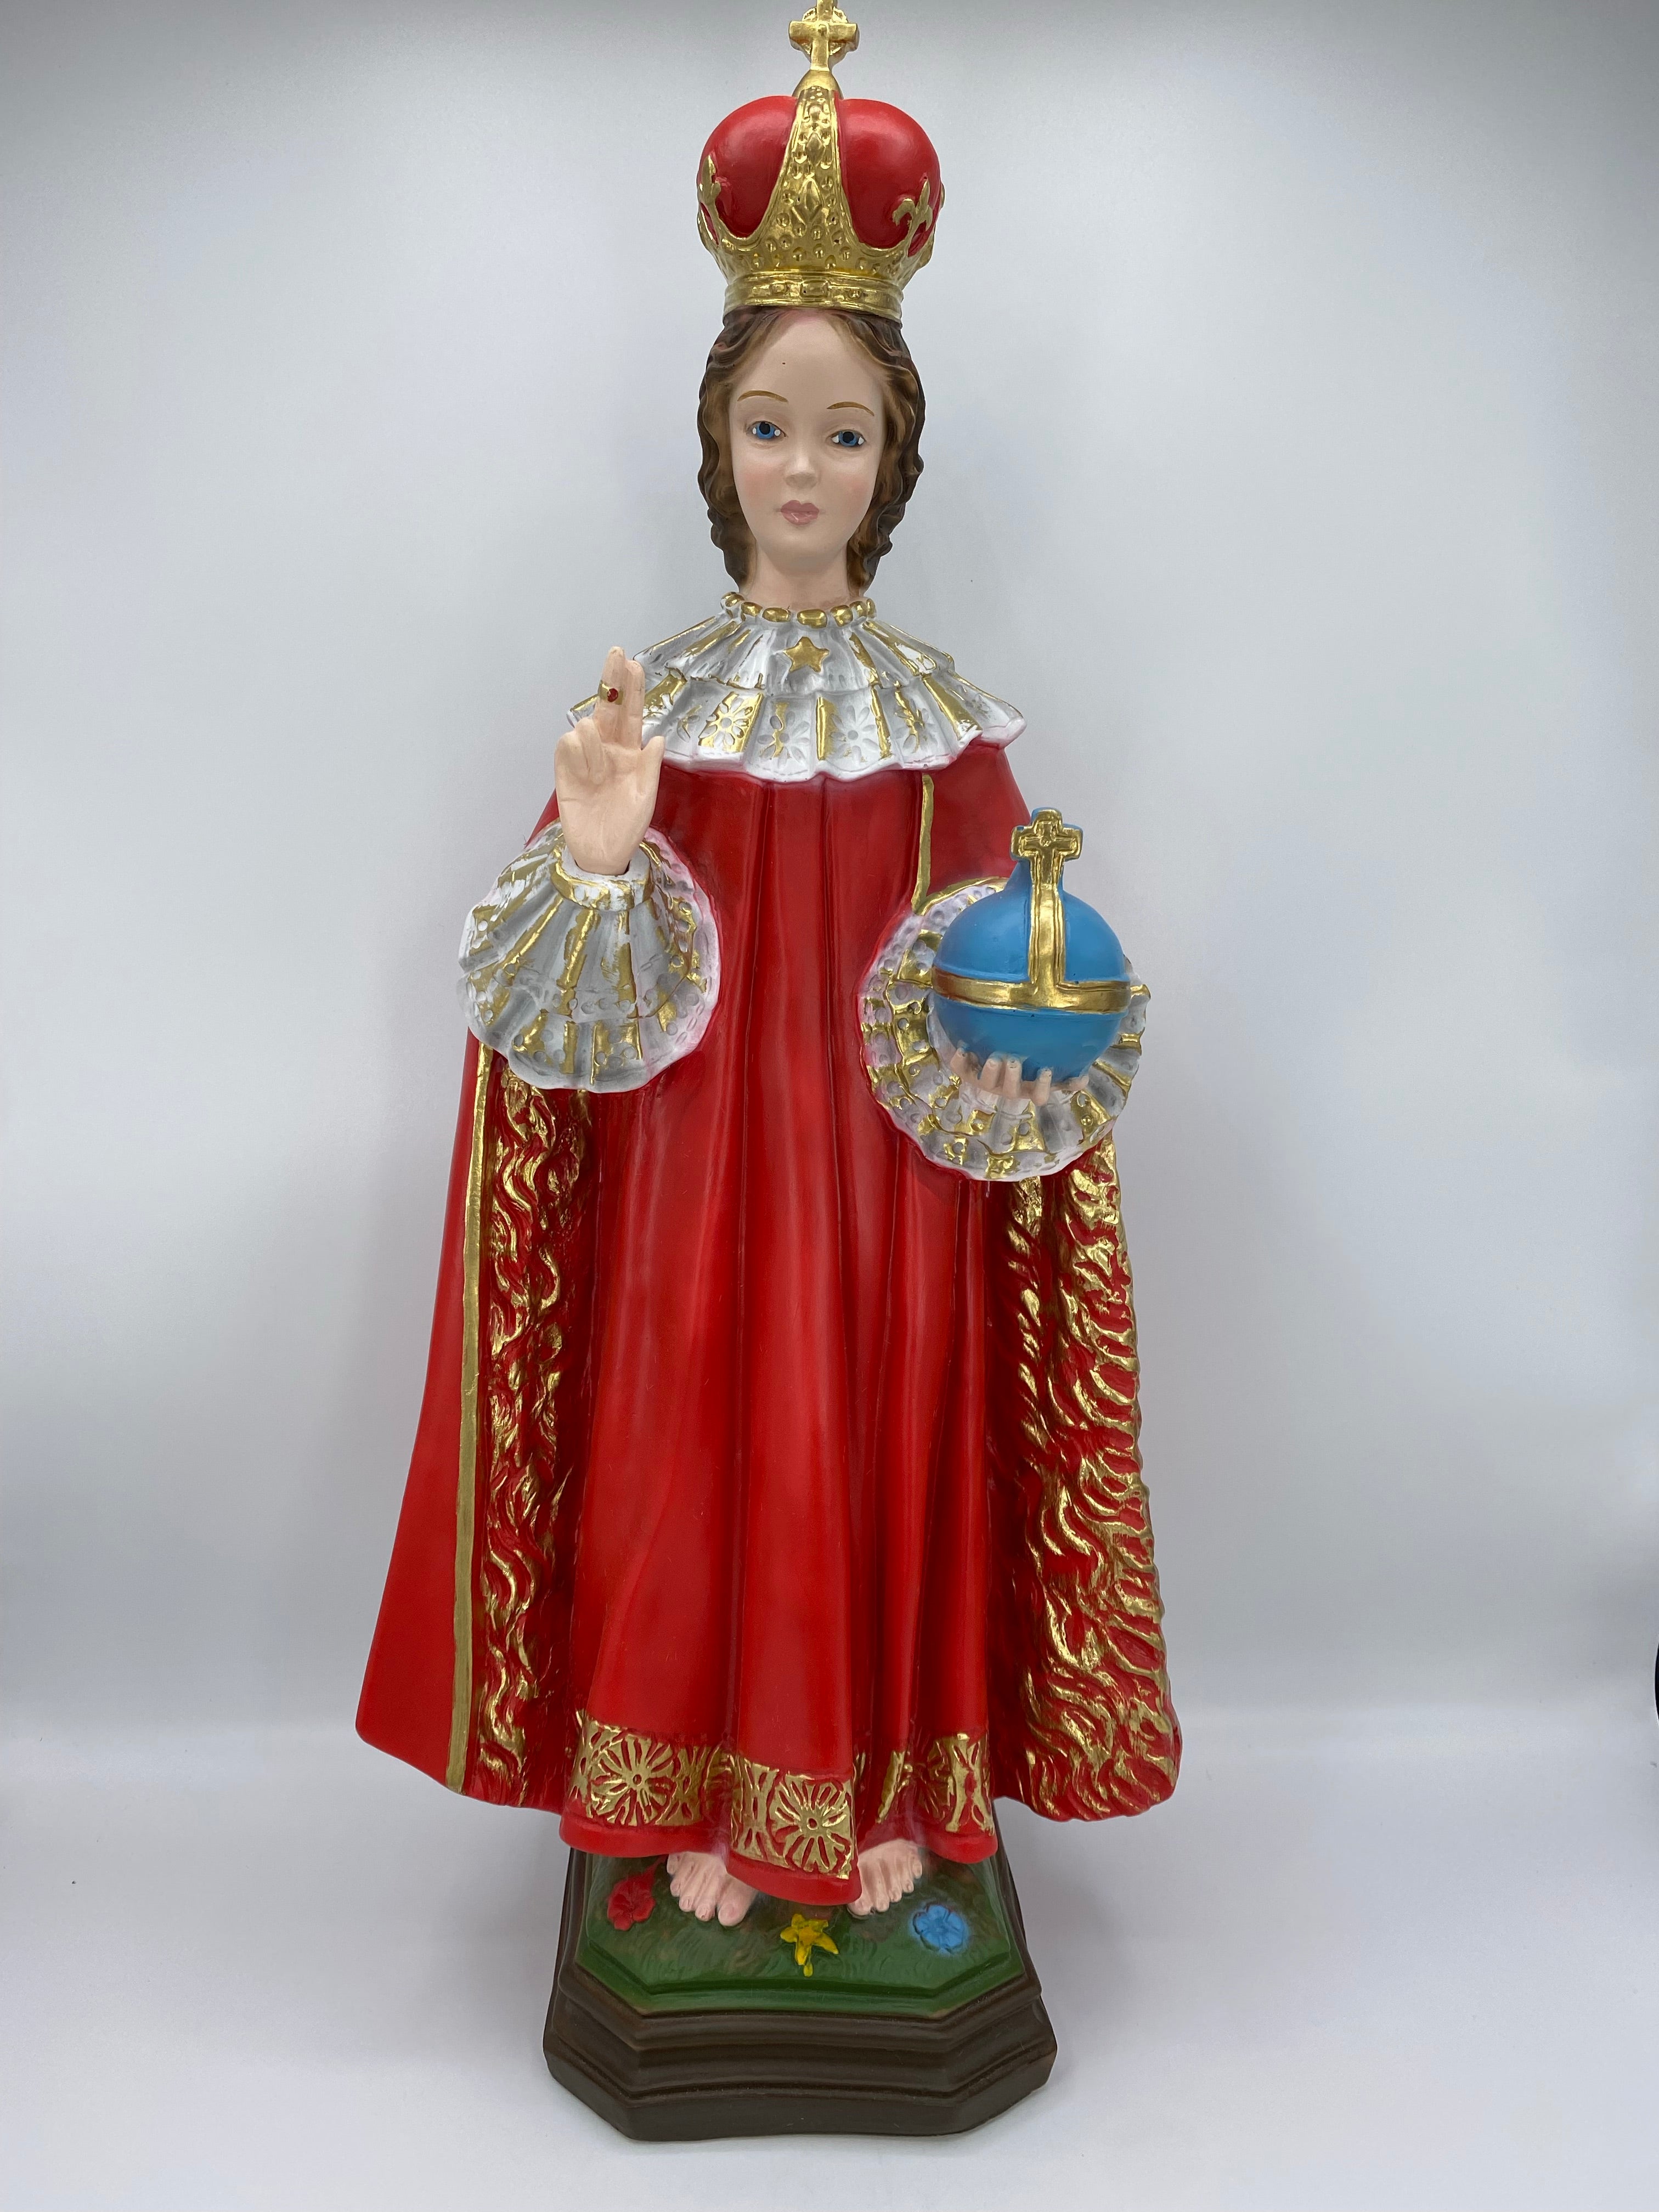 The Faith Gift Shop Infant Jesus of Prague - Tuscan Style Collection- Hand Painted in Italy - Nino Jesus de Praga